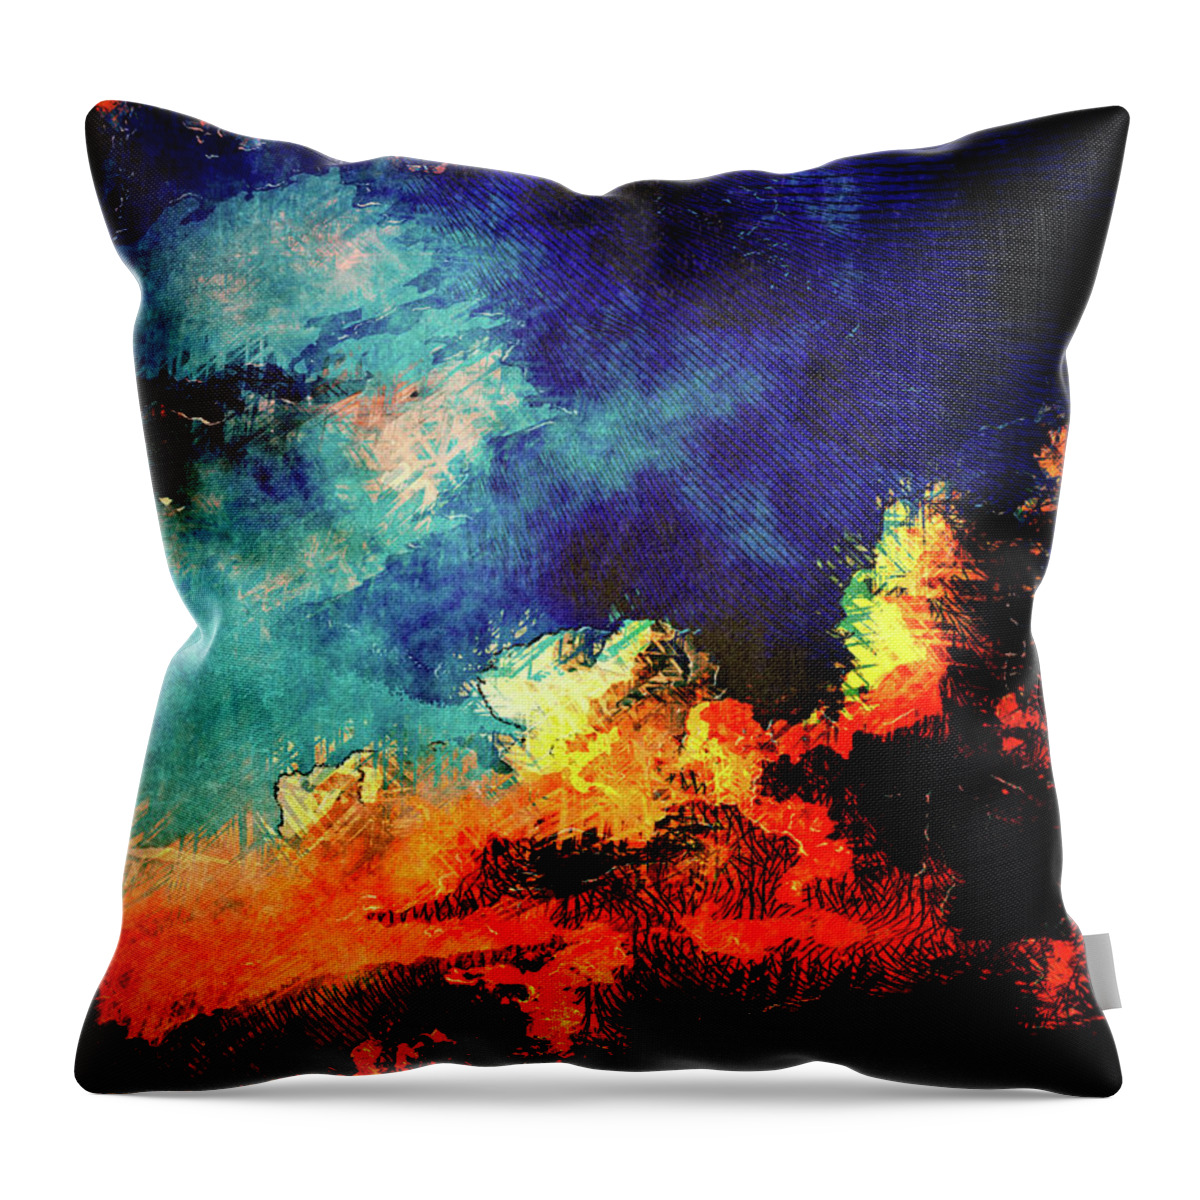 Sunset Throw Pillow featuring the digital art Sunset Clouds by Phil Perkins